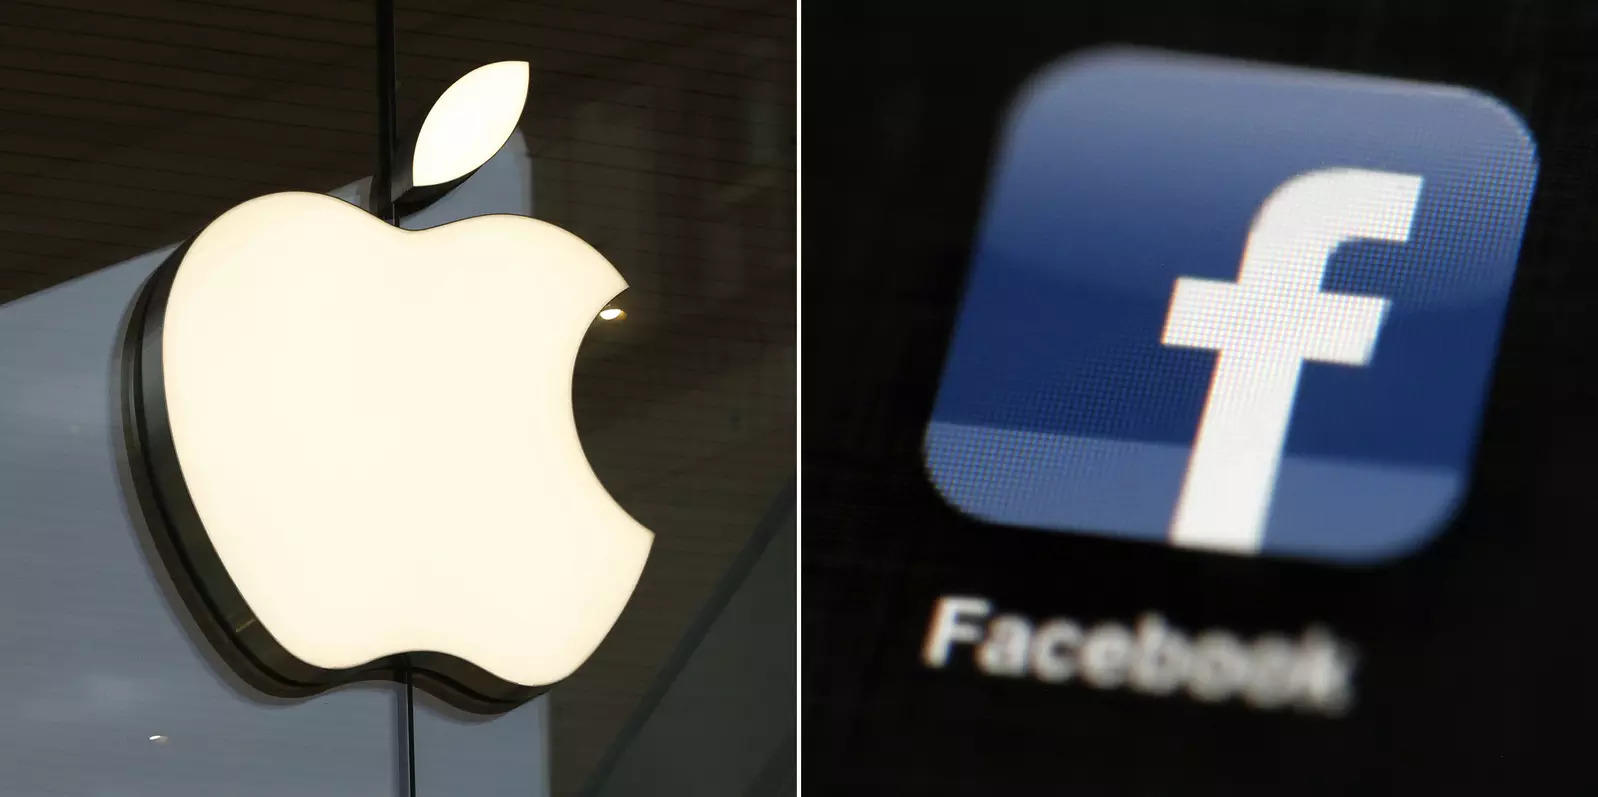 Facebook takes the gloves off in feud with Apple, Marketing & Advertising  News, ET BrandEquity